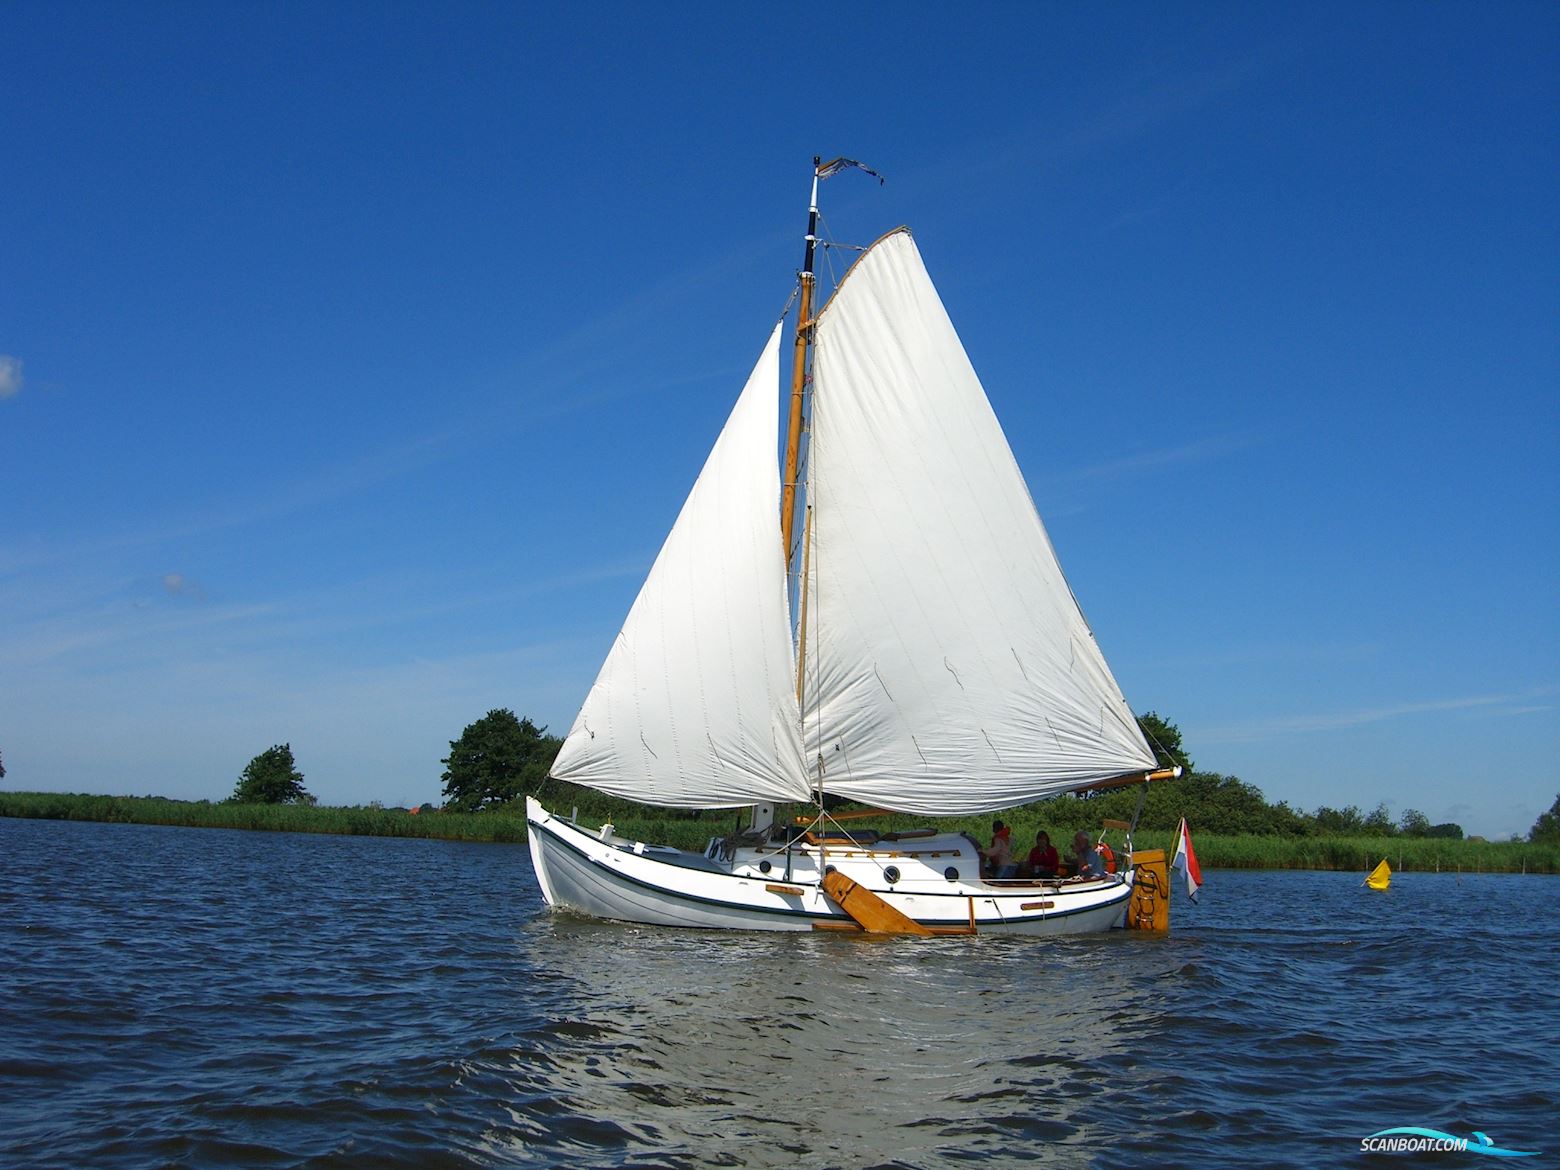 Lemsteraak Harlaar Sailing boat 1983, with Nanni engine, The Netherlands